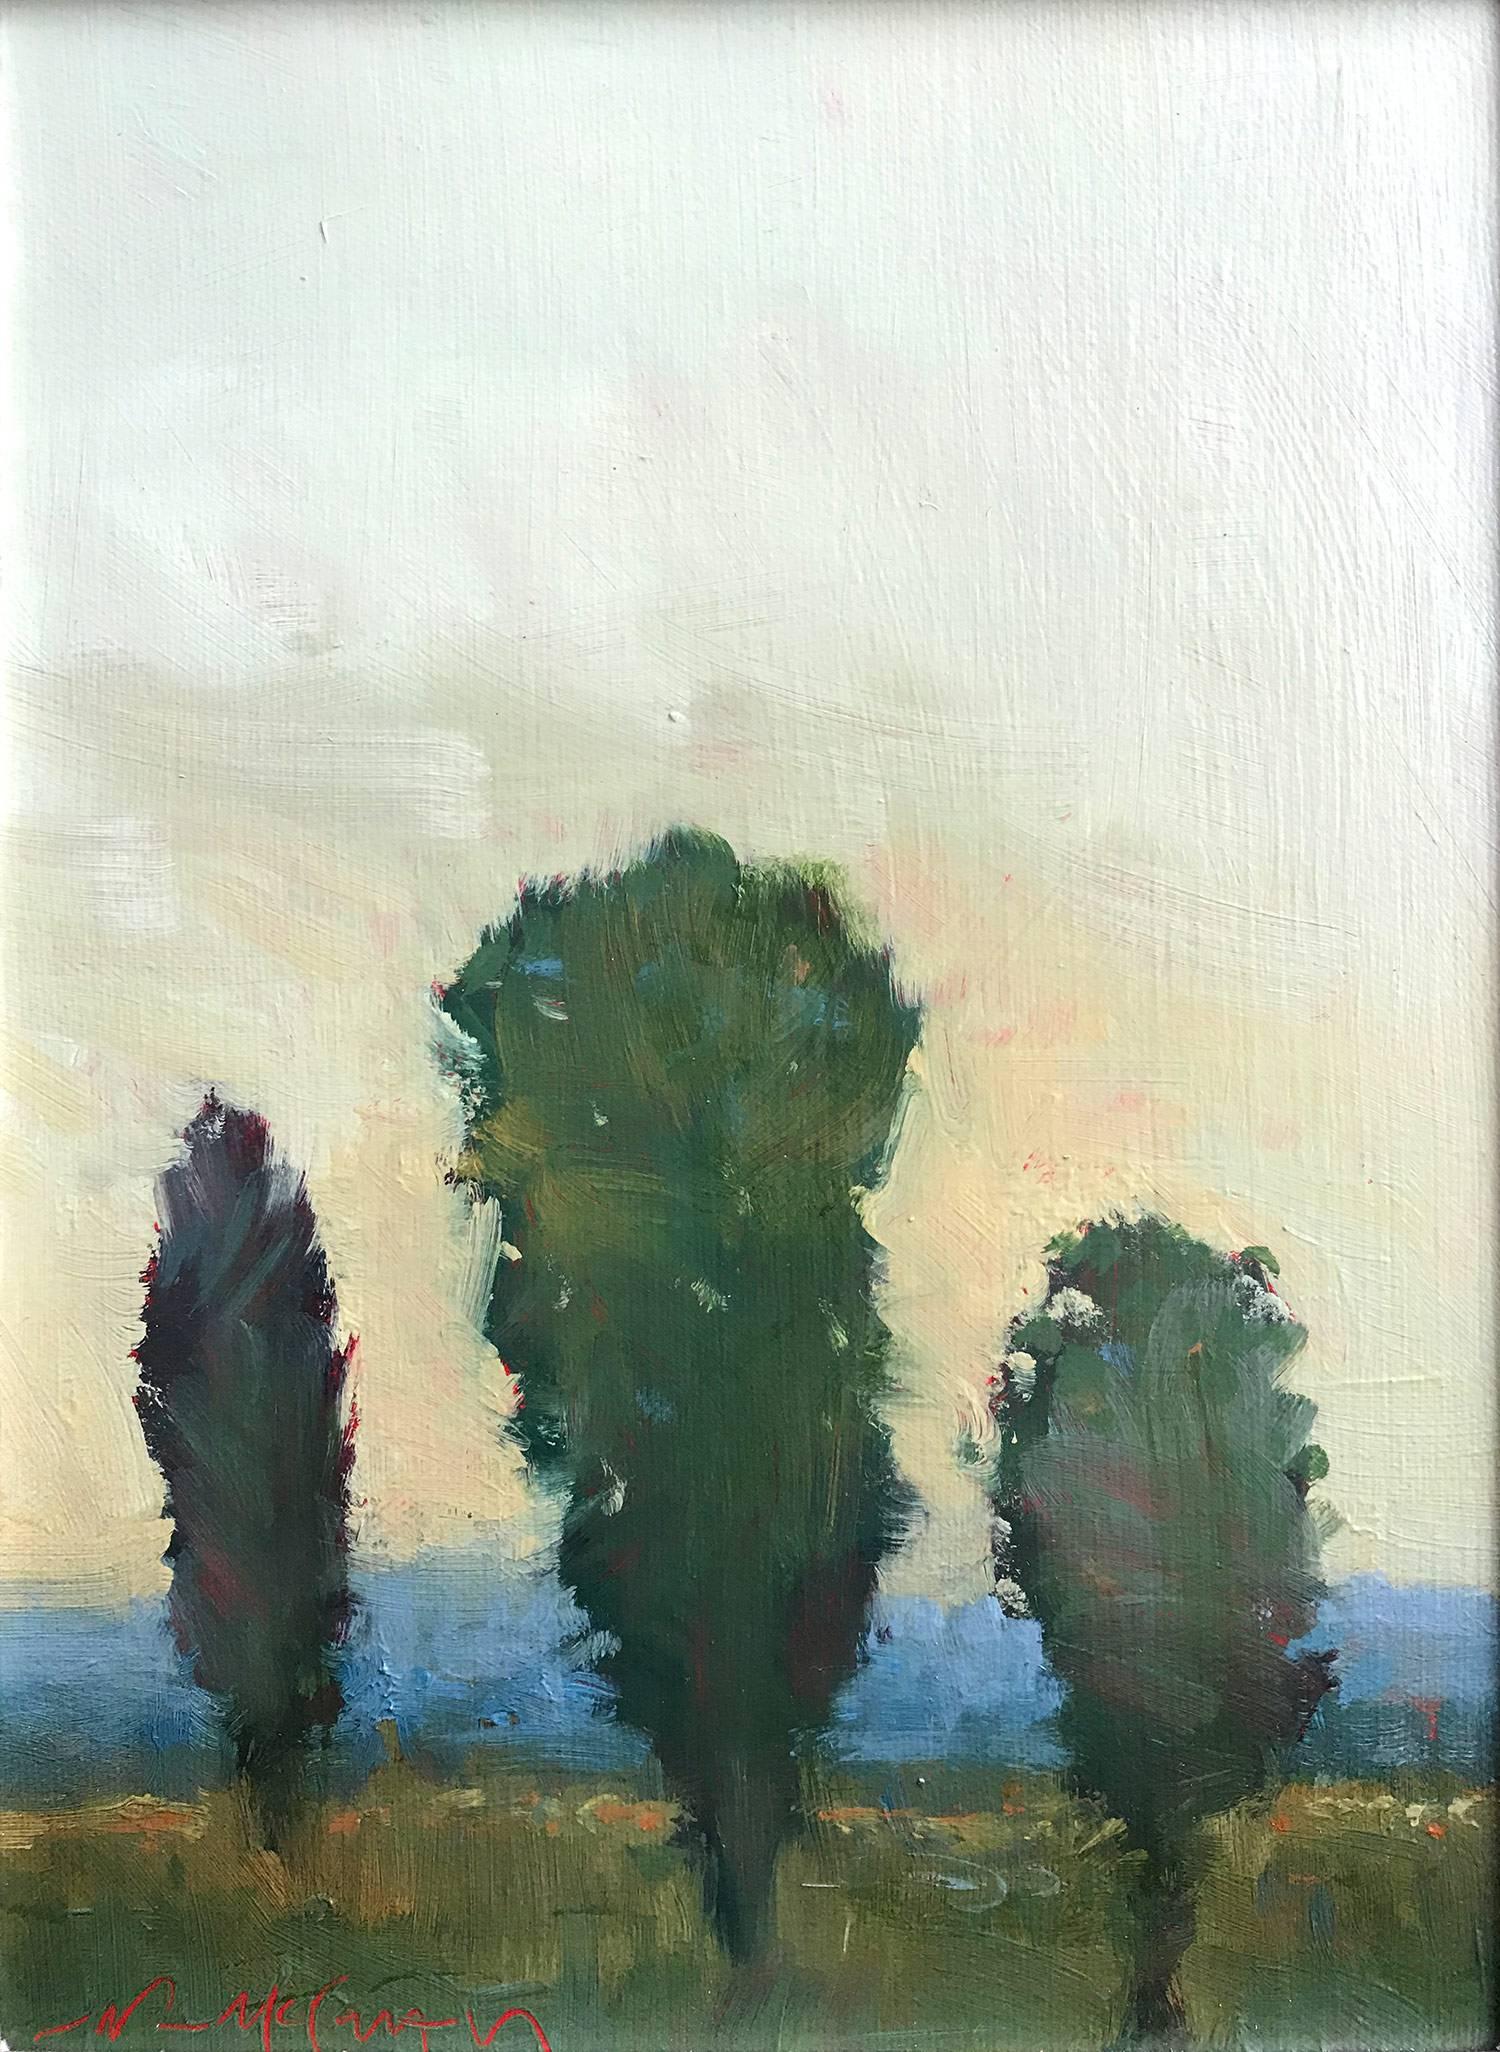 From the Distance - Painting by William McCarthy